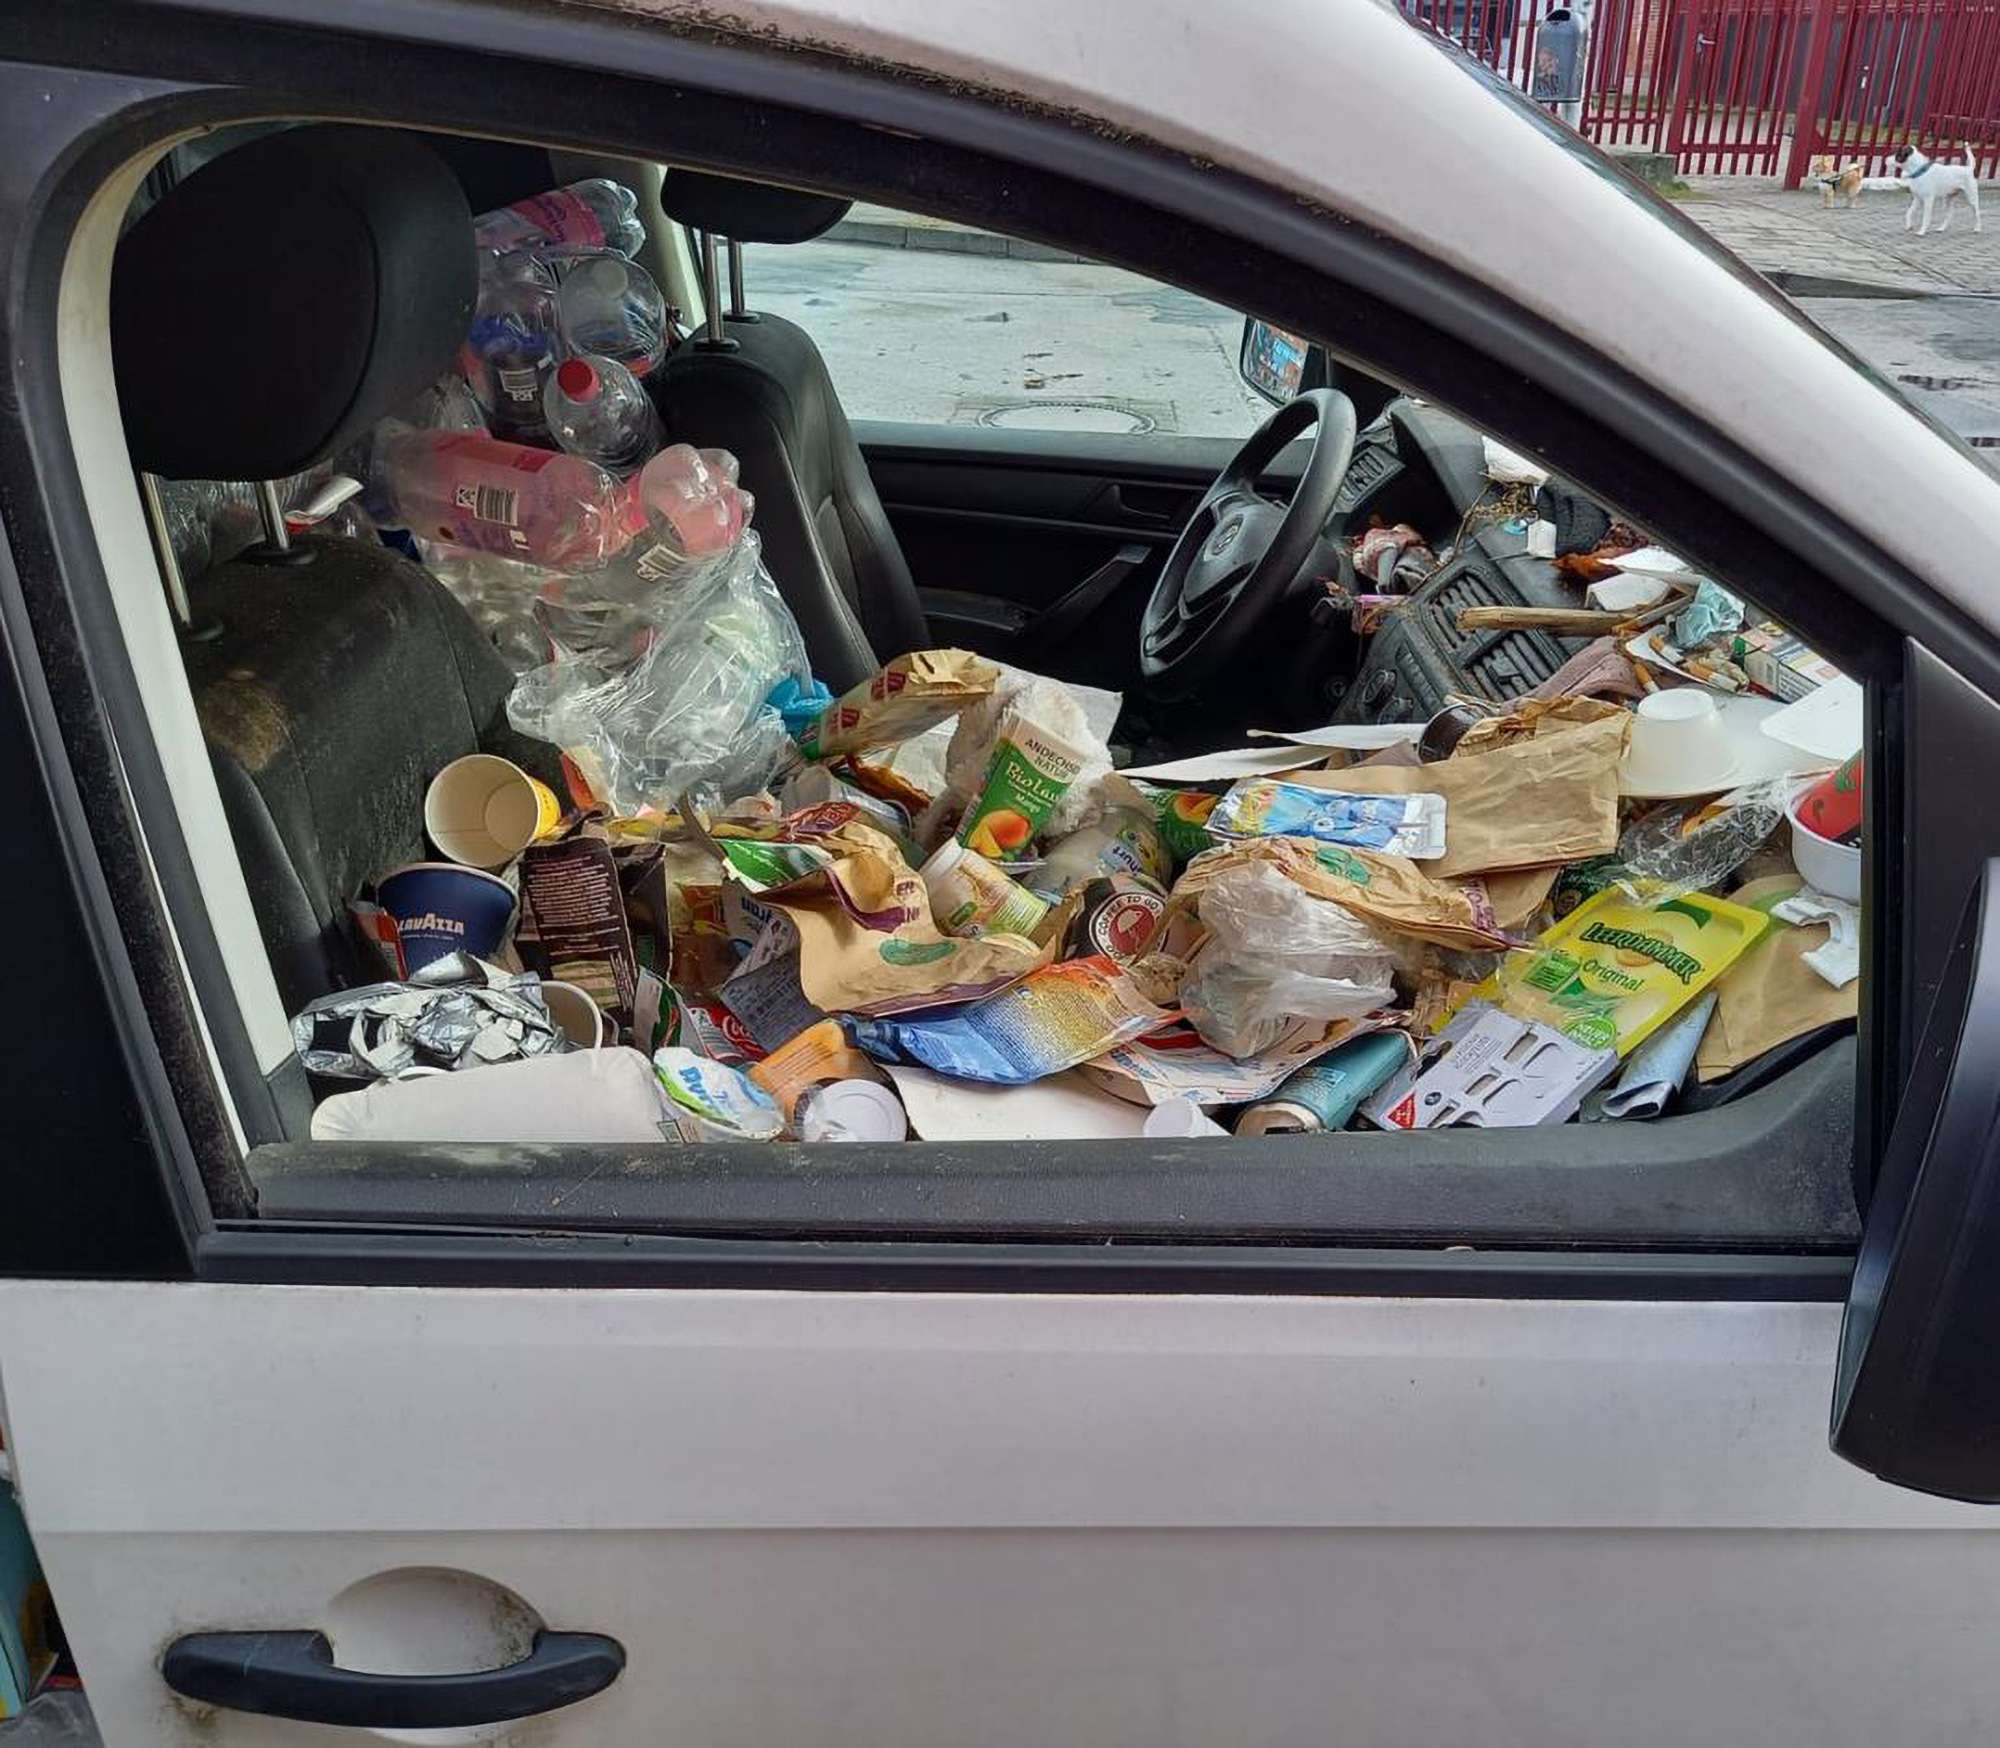 Read more about the article Police Nick Driver Over Car Full Of Takeaway Trash